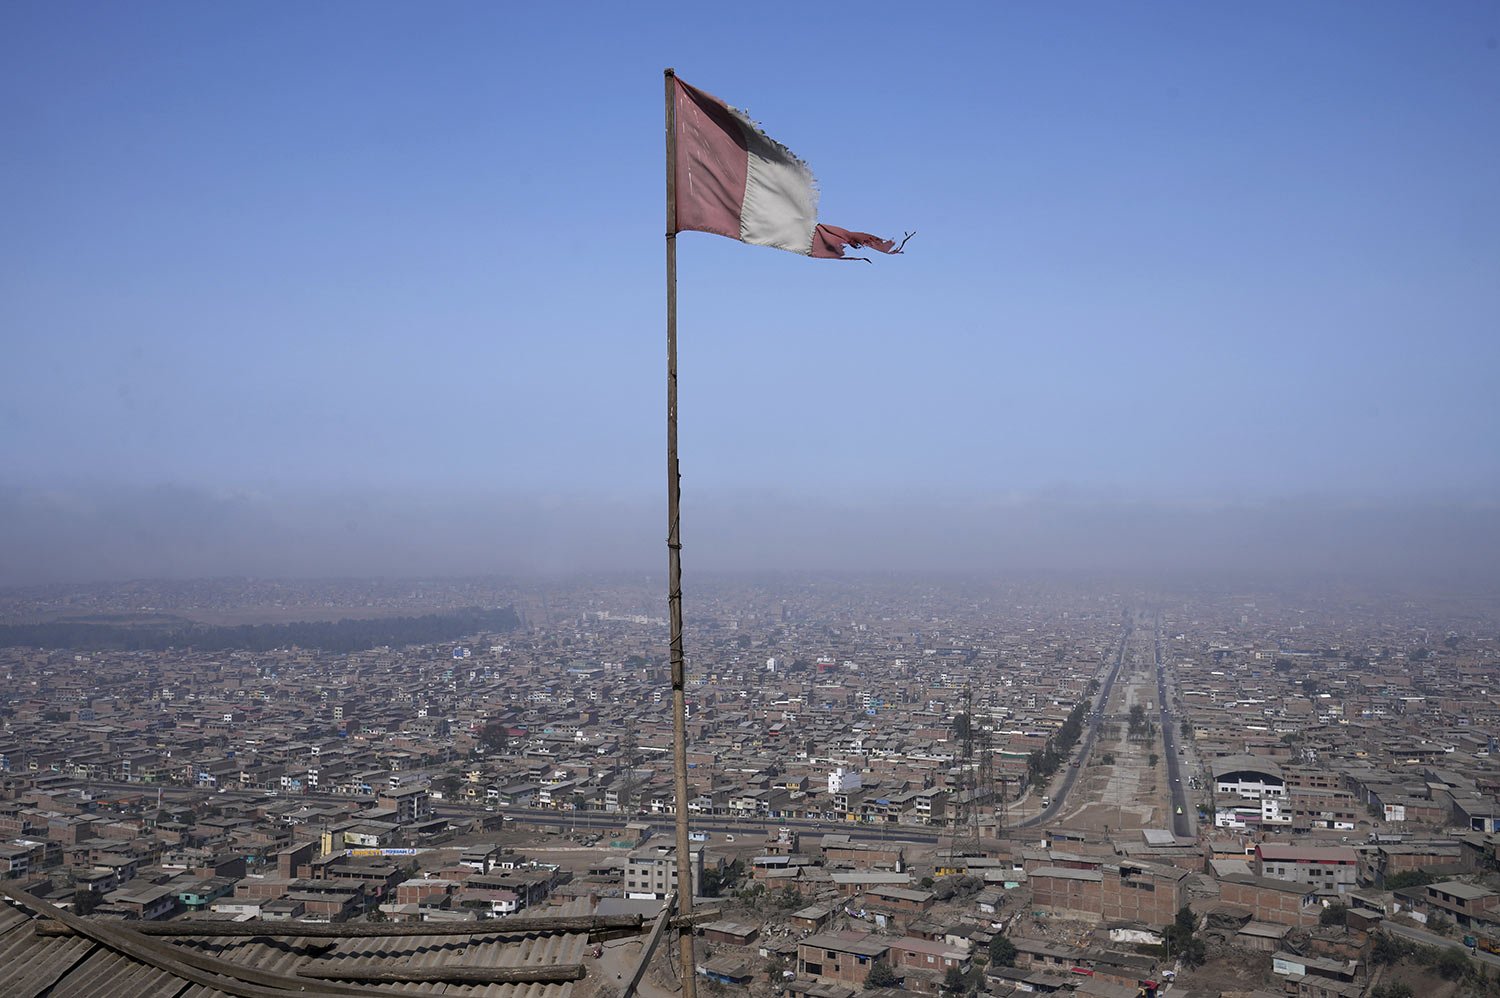  A battered Peruvian flag flies from the roof of a soup kitchen in the Villa Maria neighborhood of Lima, Peru, April 12, 2022. Soup kitchens are on the rise as a lifeline as global spikes in food and fuel prices are proving a double whammy for Peru. 